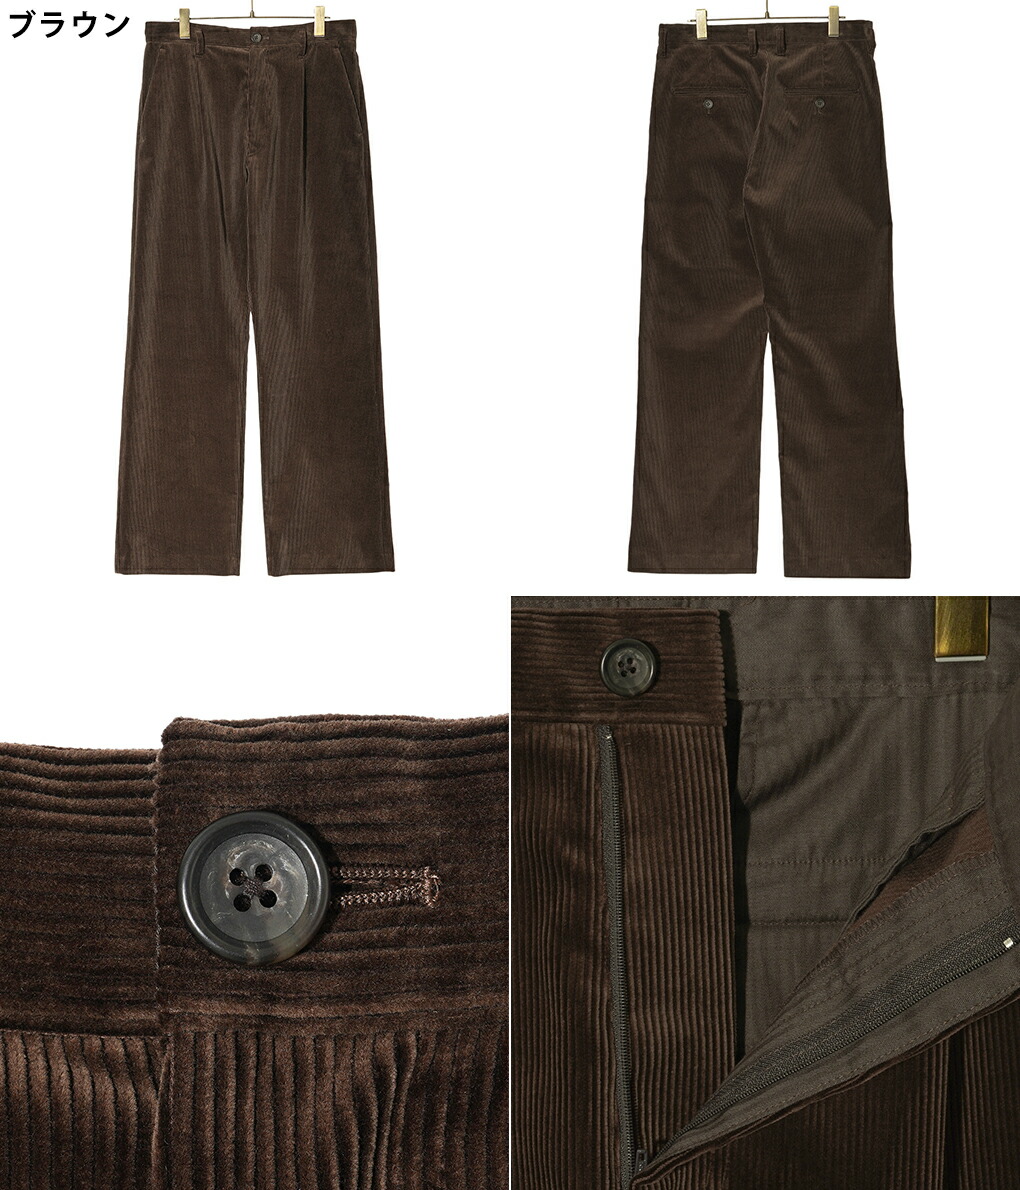 PORT BY ARK / ポートバイアーク ： Corduroy Trousers / 全2色